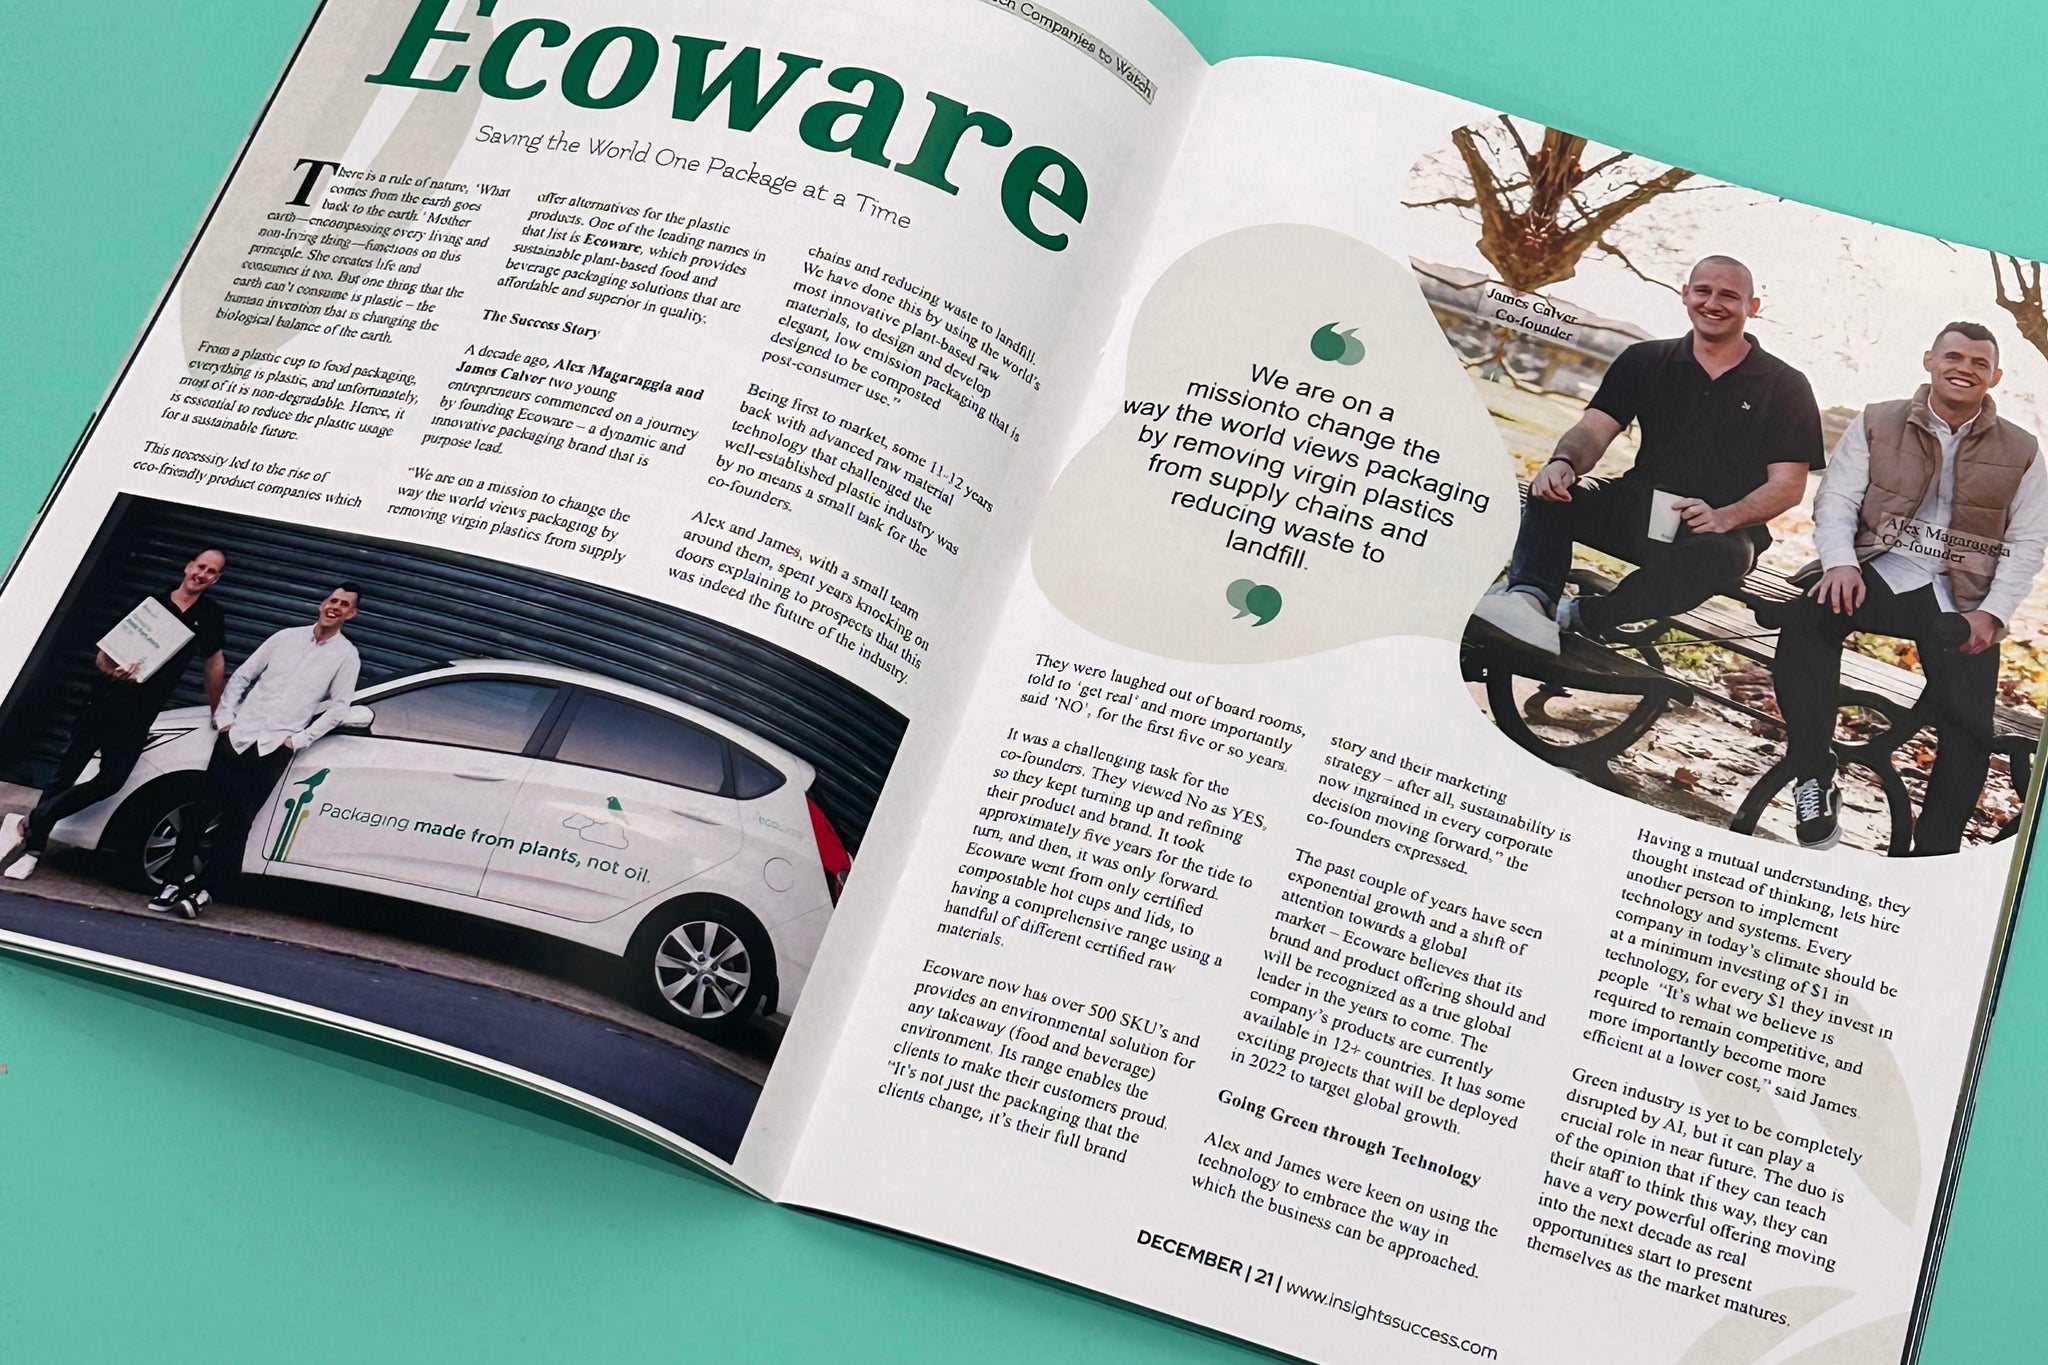 Ecoware recognised as one of the top 10 Green, Sustainable Companies to watch.